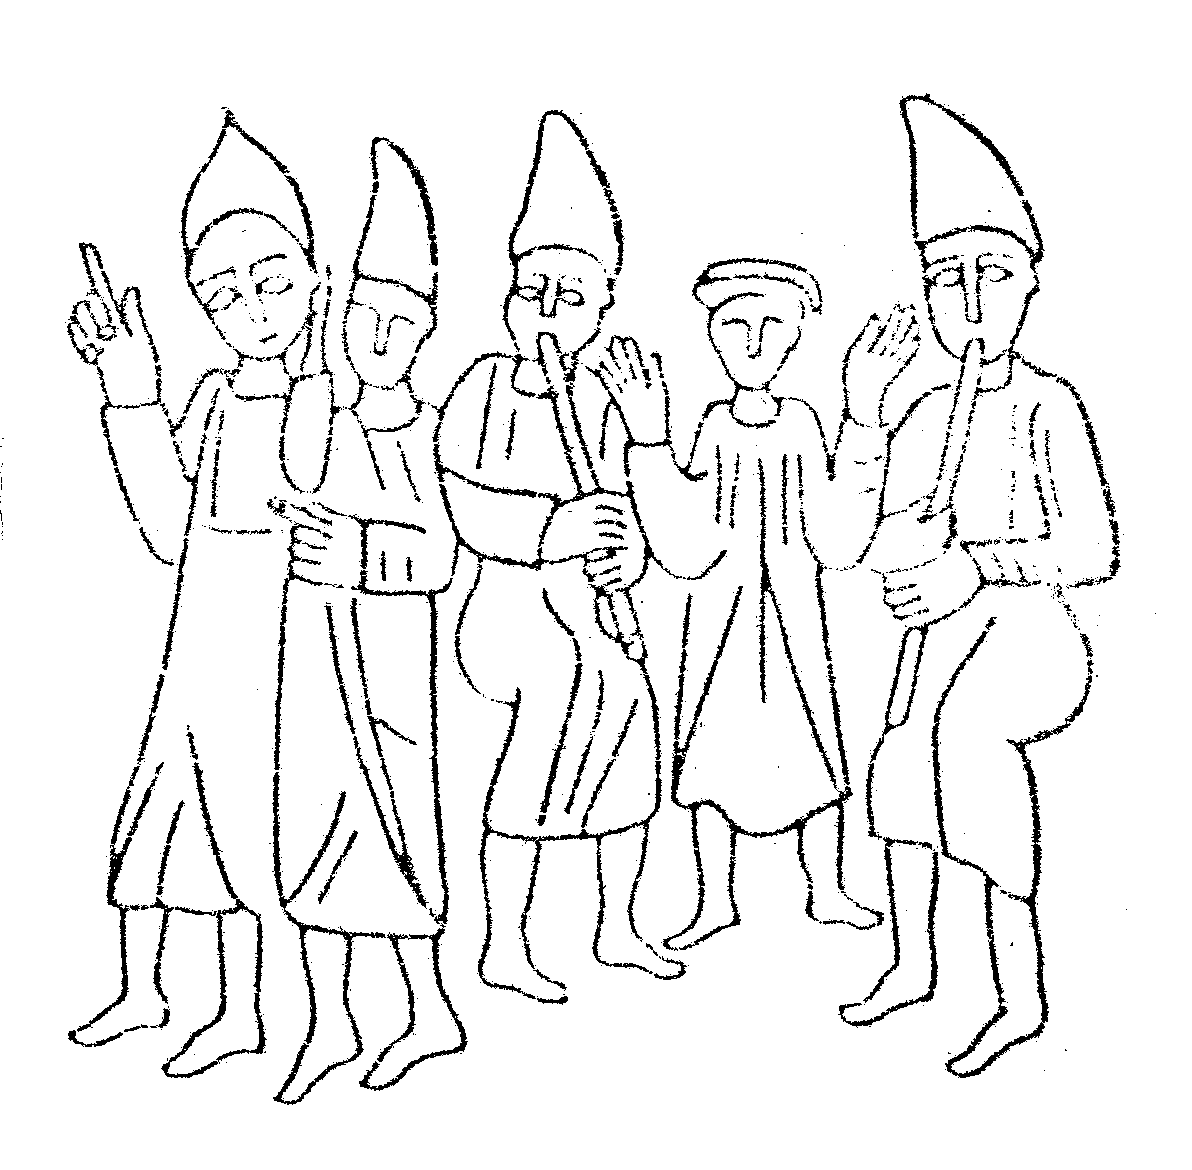 Found imagery - Medieval era black & white line drawing of a group of religious looking men with flutes